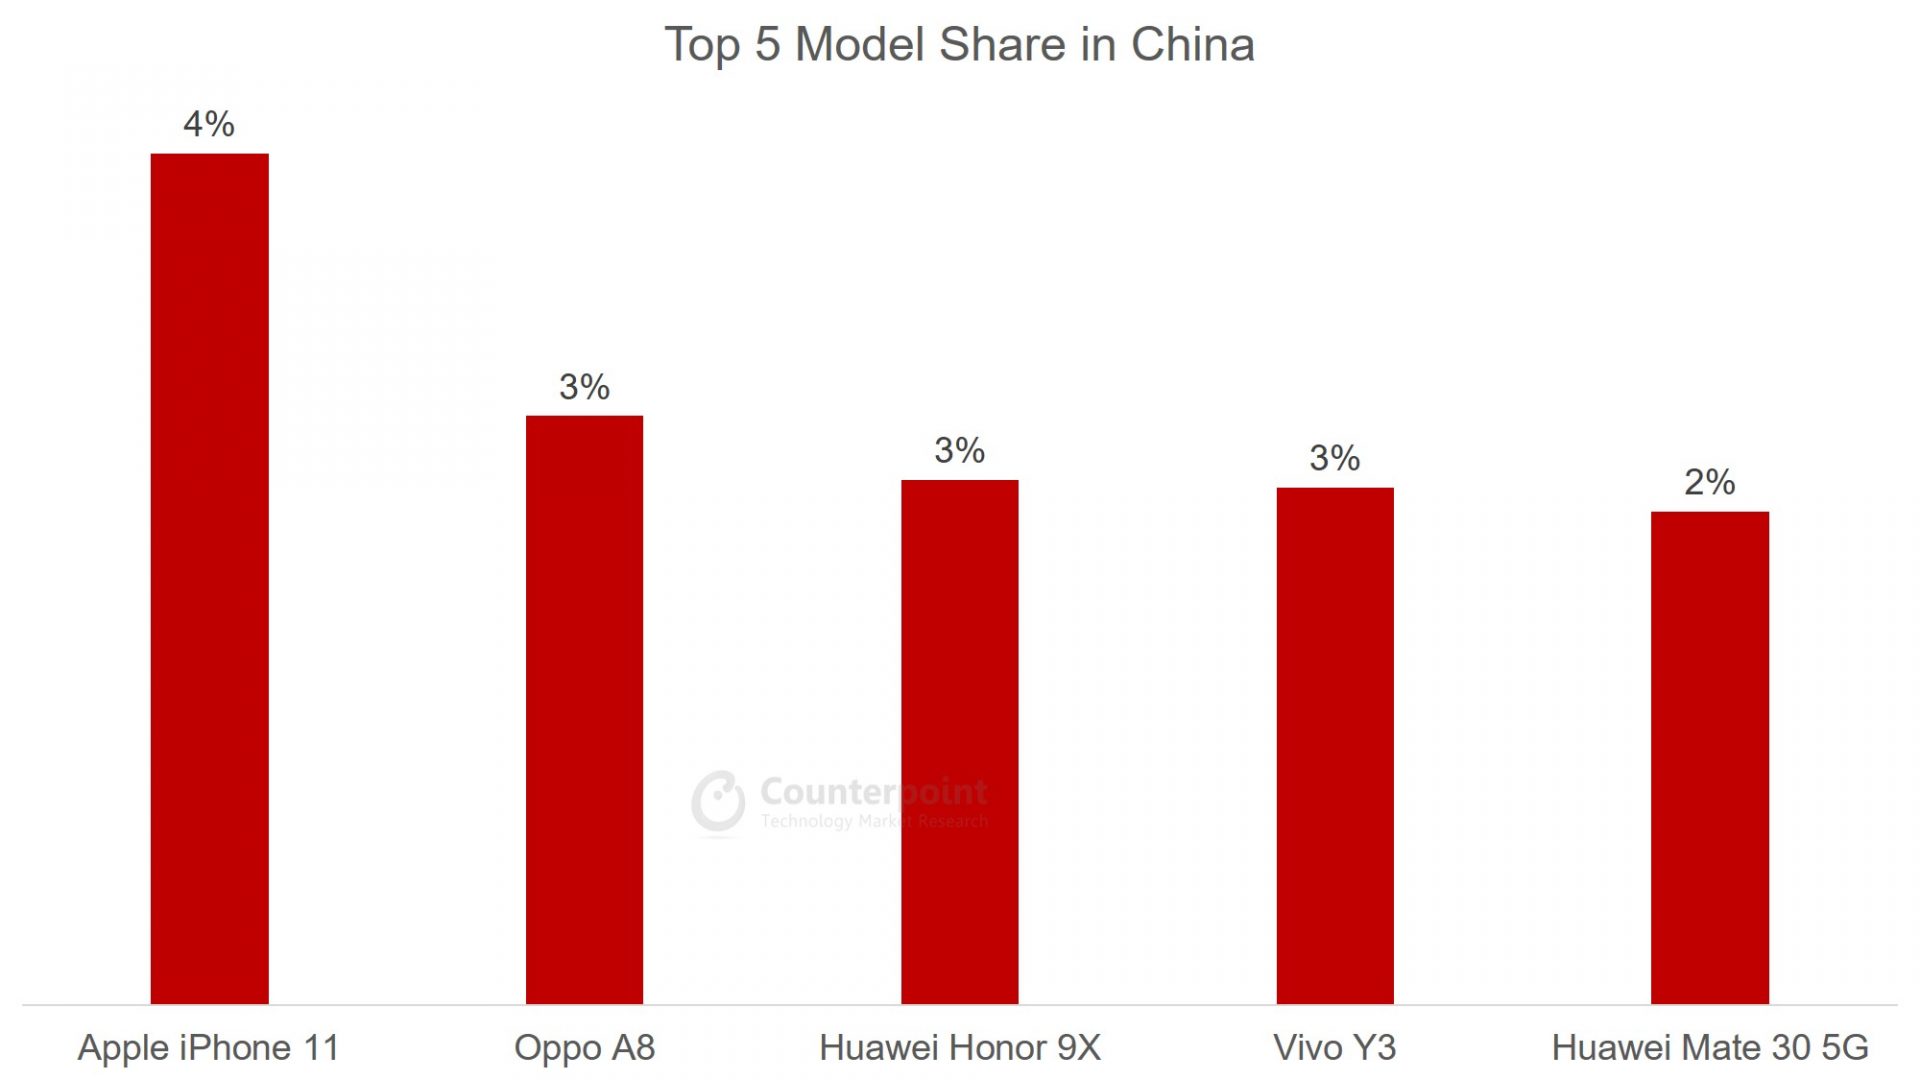 Counterpoint: (Apr 2020) Top 5 Smartphone Model Share in China